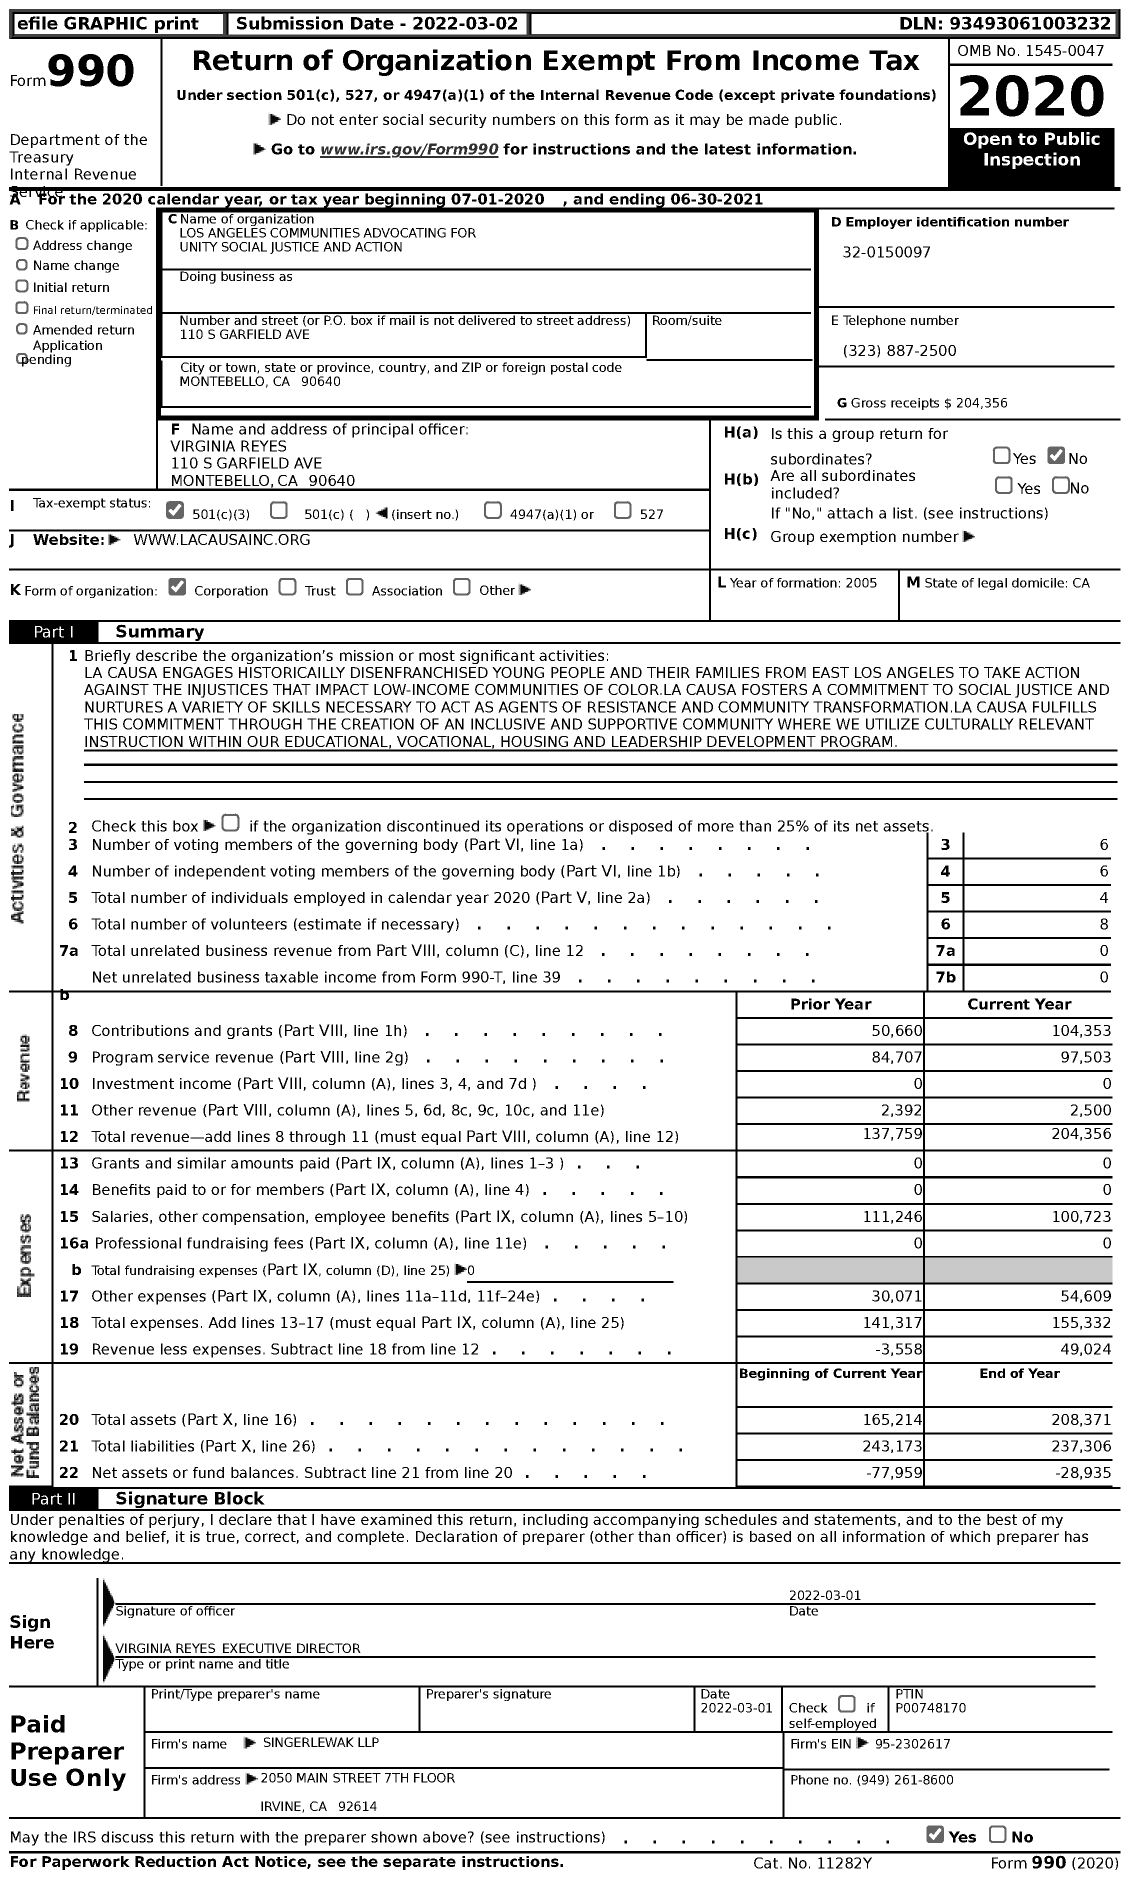 Image of first page of 2020 Form 990 for Los Angeles Communities Advocating for Unity Social Justice and Action